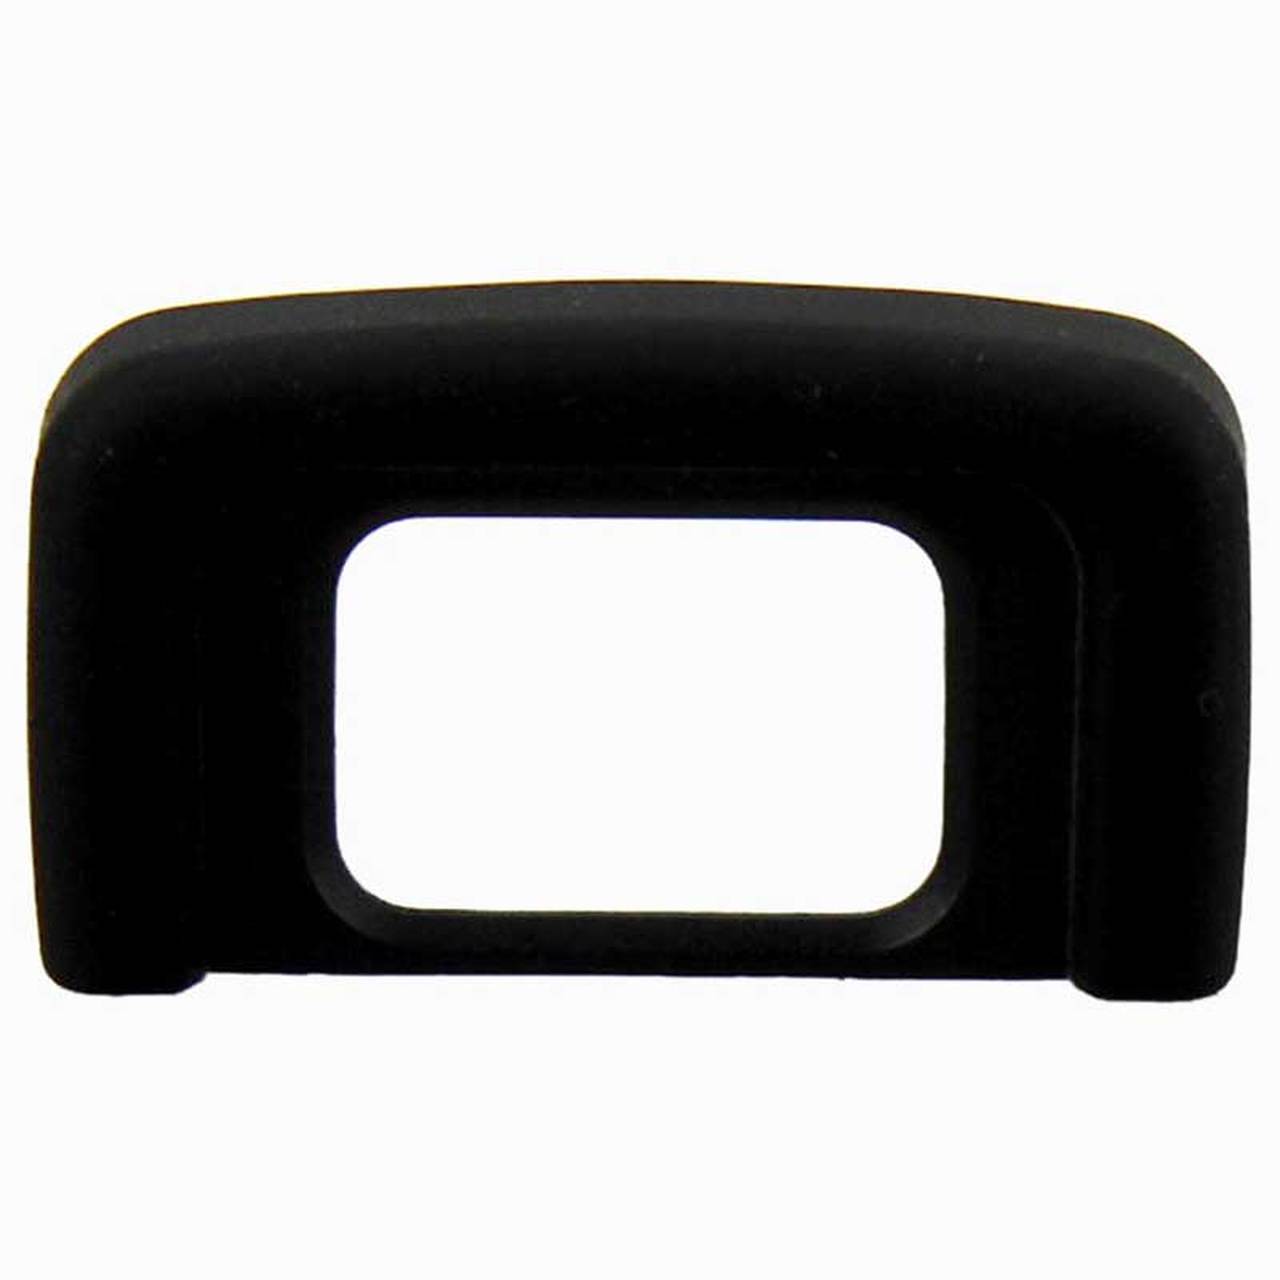 Promaster 8366 Replacement Eye Cup for Nikon DK25